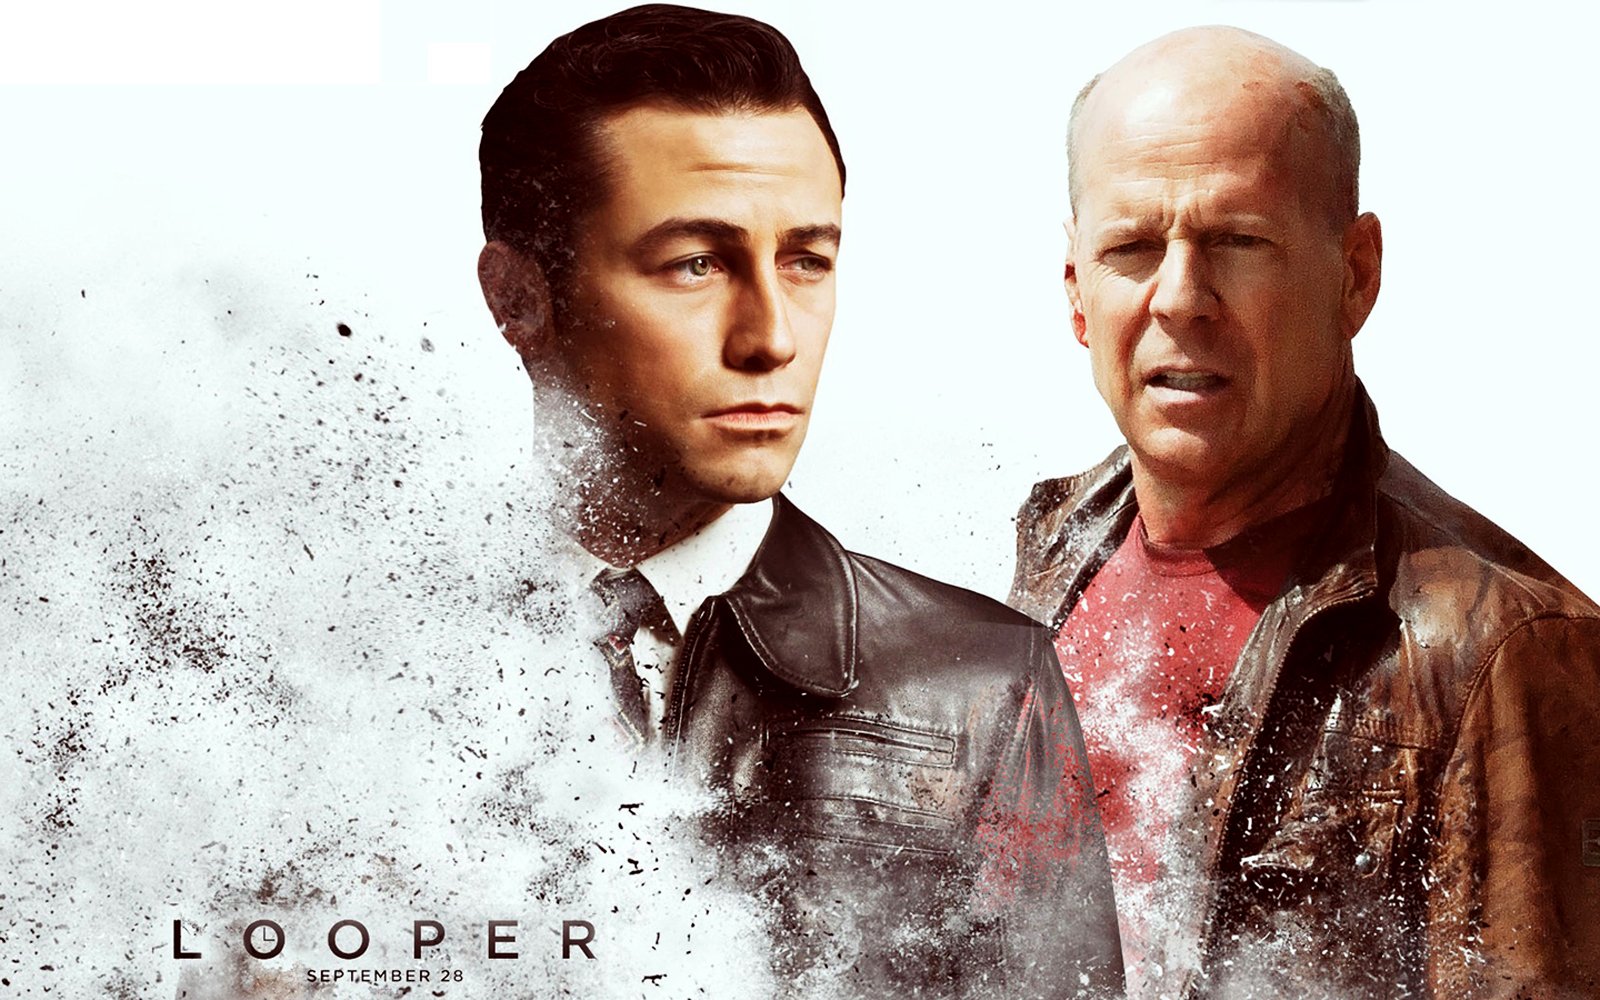 Central Wallpaper: Looper Movie HD Wallpaper and Posters